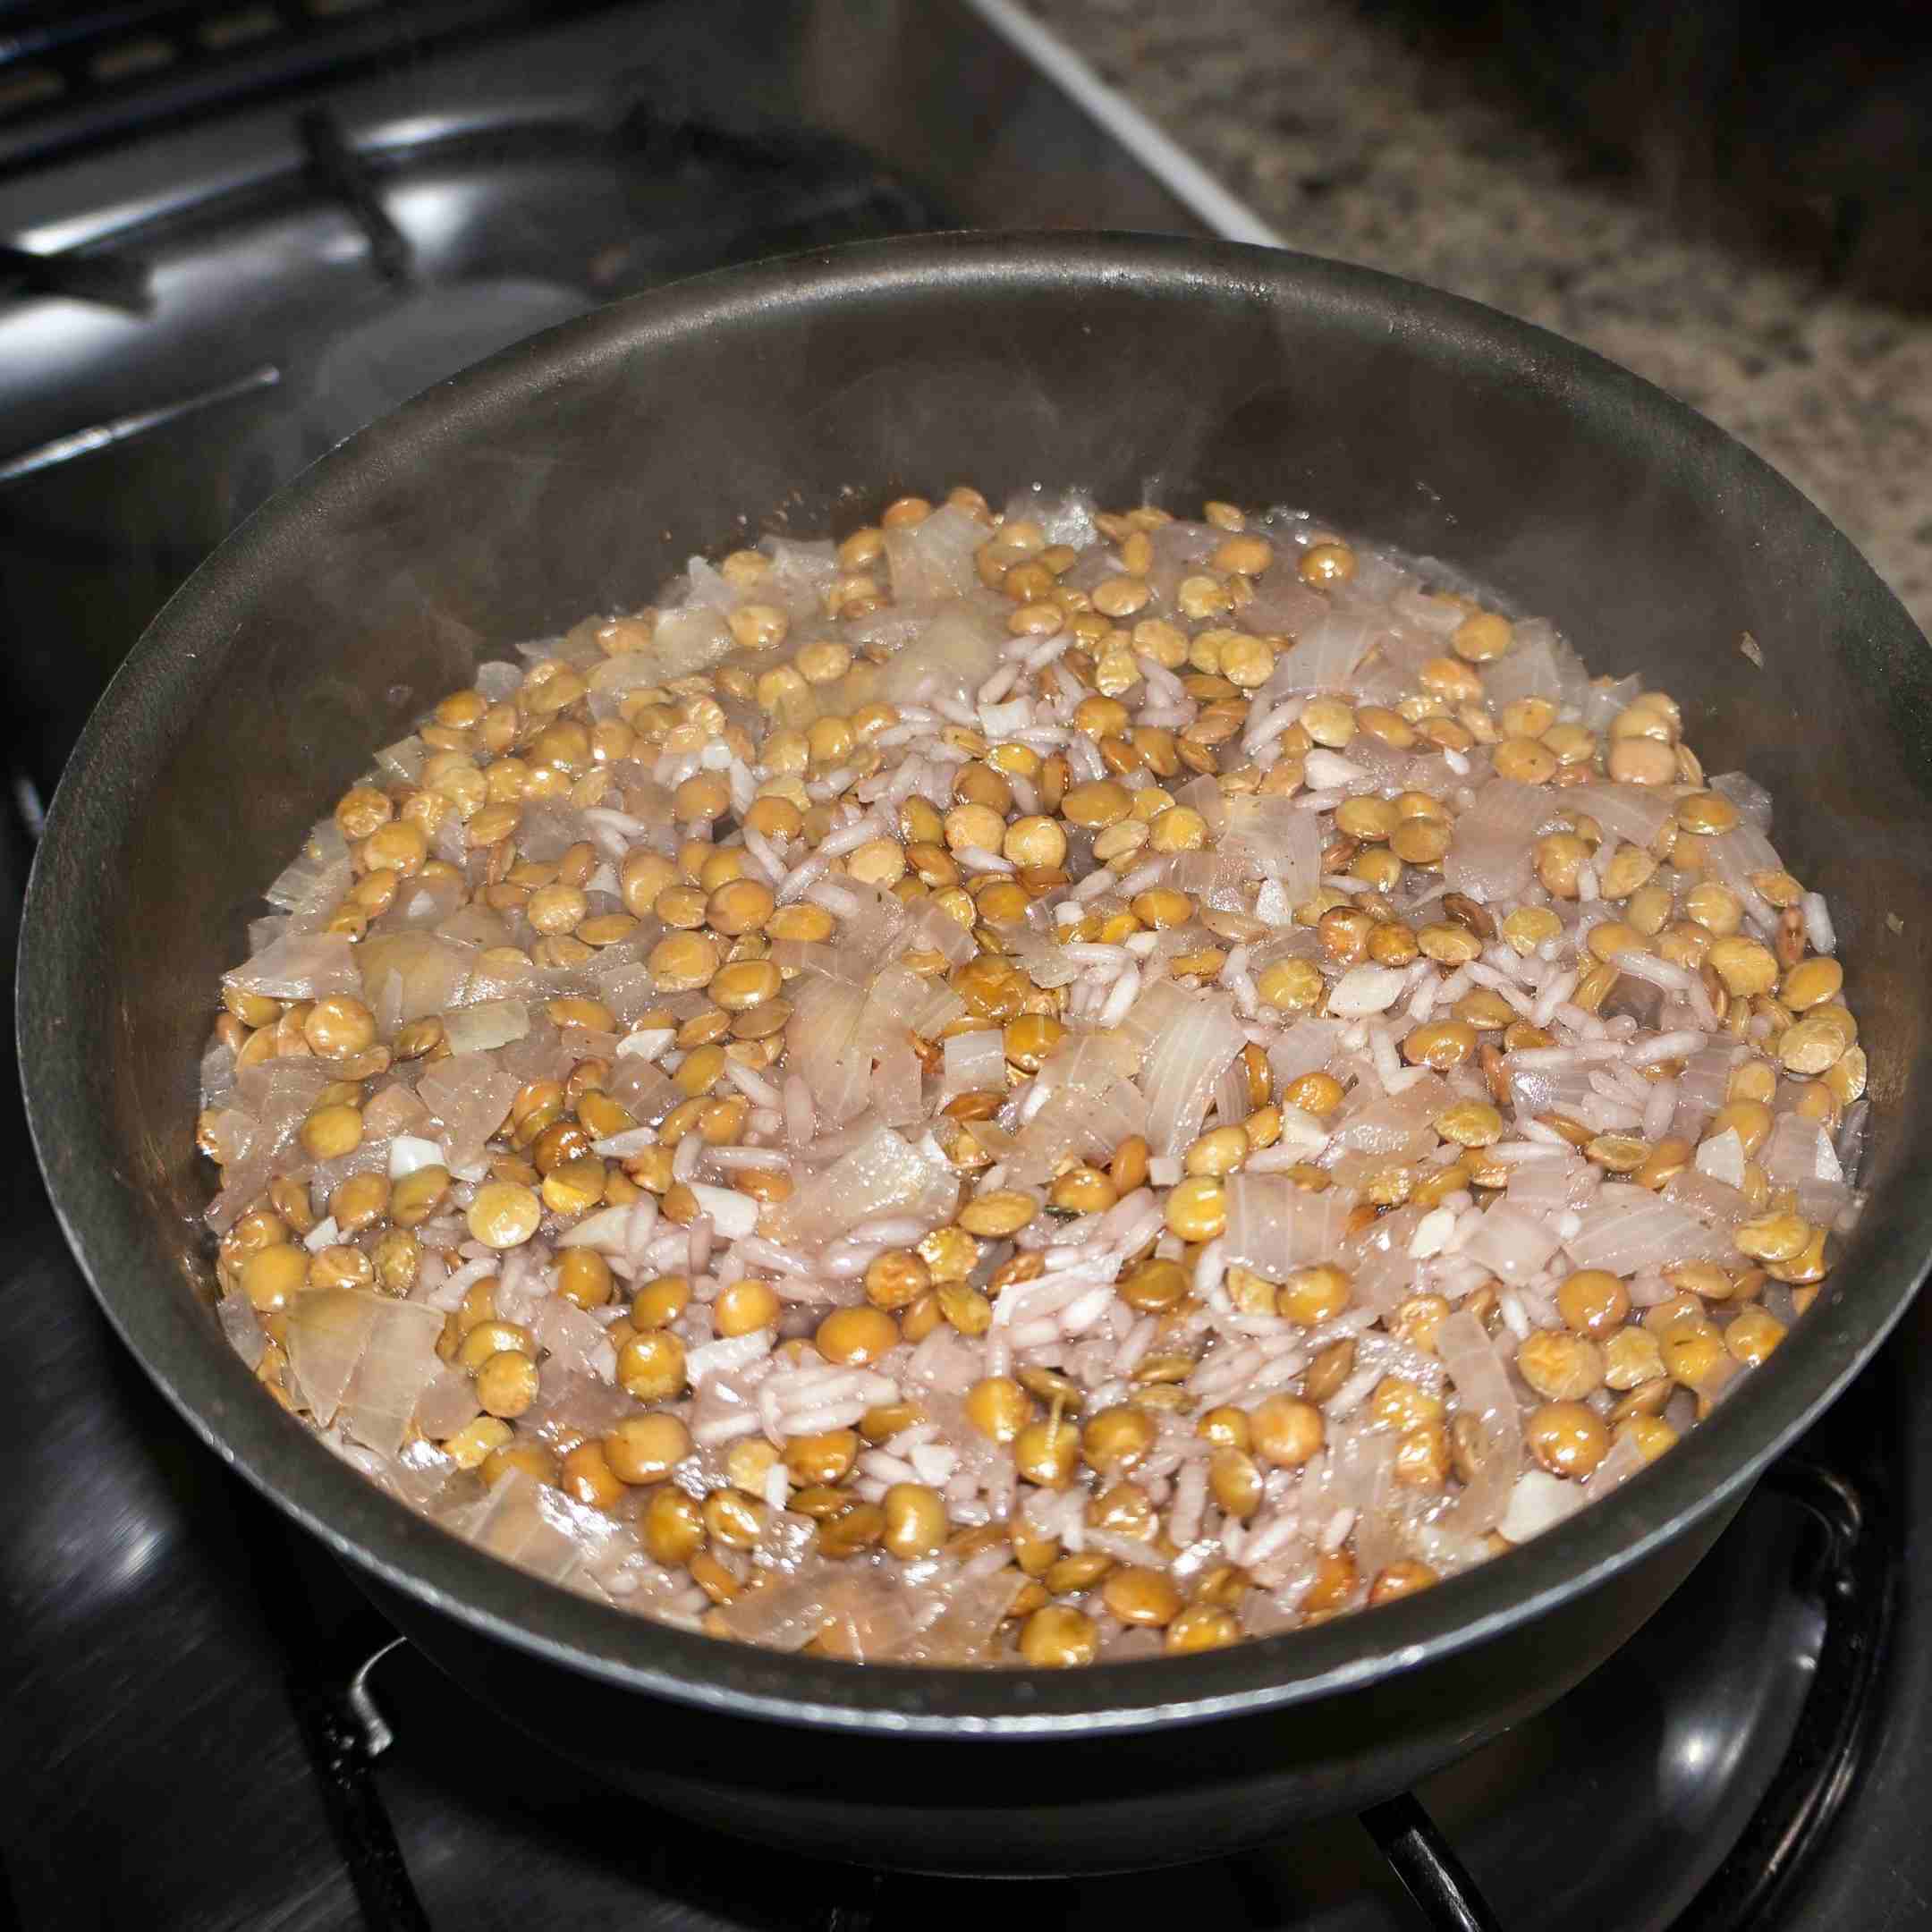 cooking lentils on the stove-top